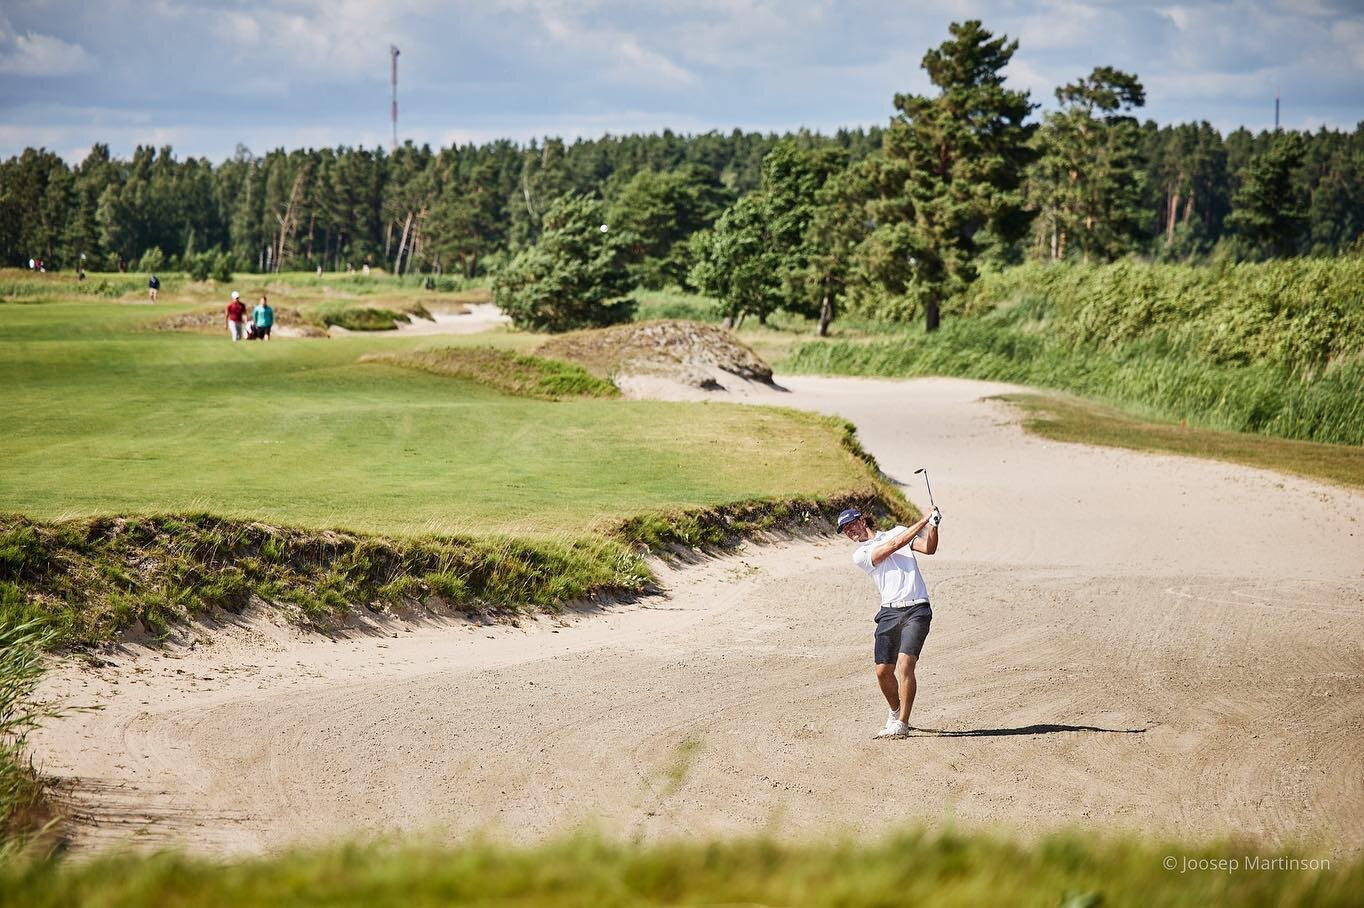 European Amateur Championship 2023 in beautiful Estonia! 

It was a crazy week! Lufthansa lost my golf clubs on my way home from The Amateur Championship (in England), which meant i had no clubs to compete with. Luckily @titleistukireland was working